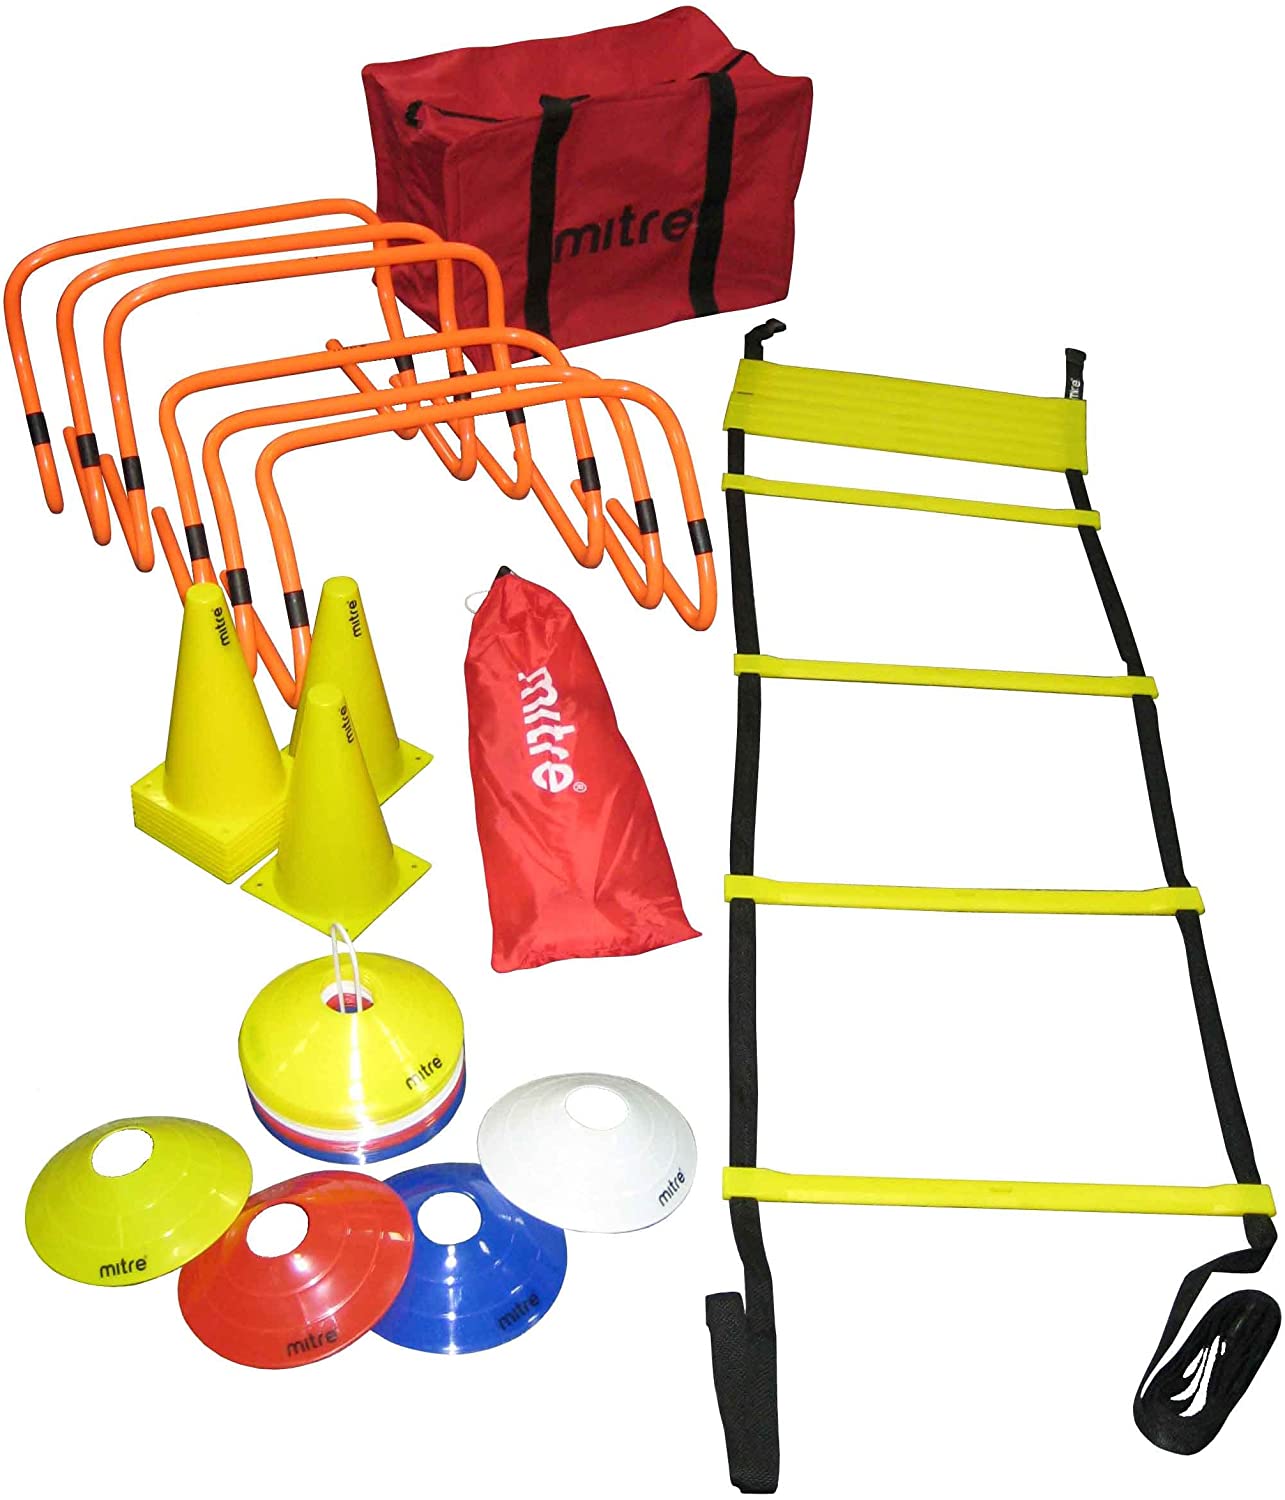 Mitre A3092AAA-ONESZ Football Training Kit with Agility Ladders ...